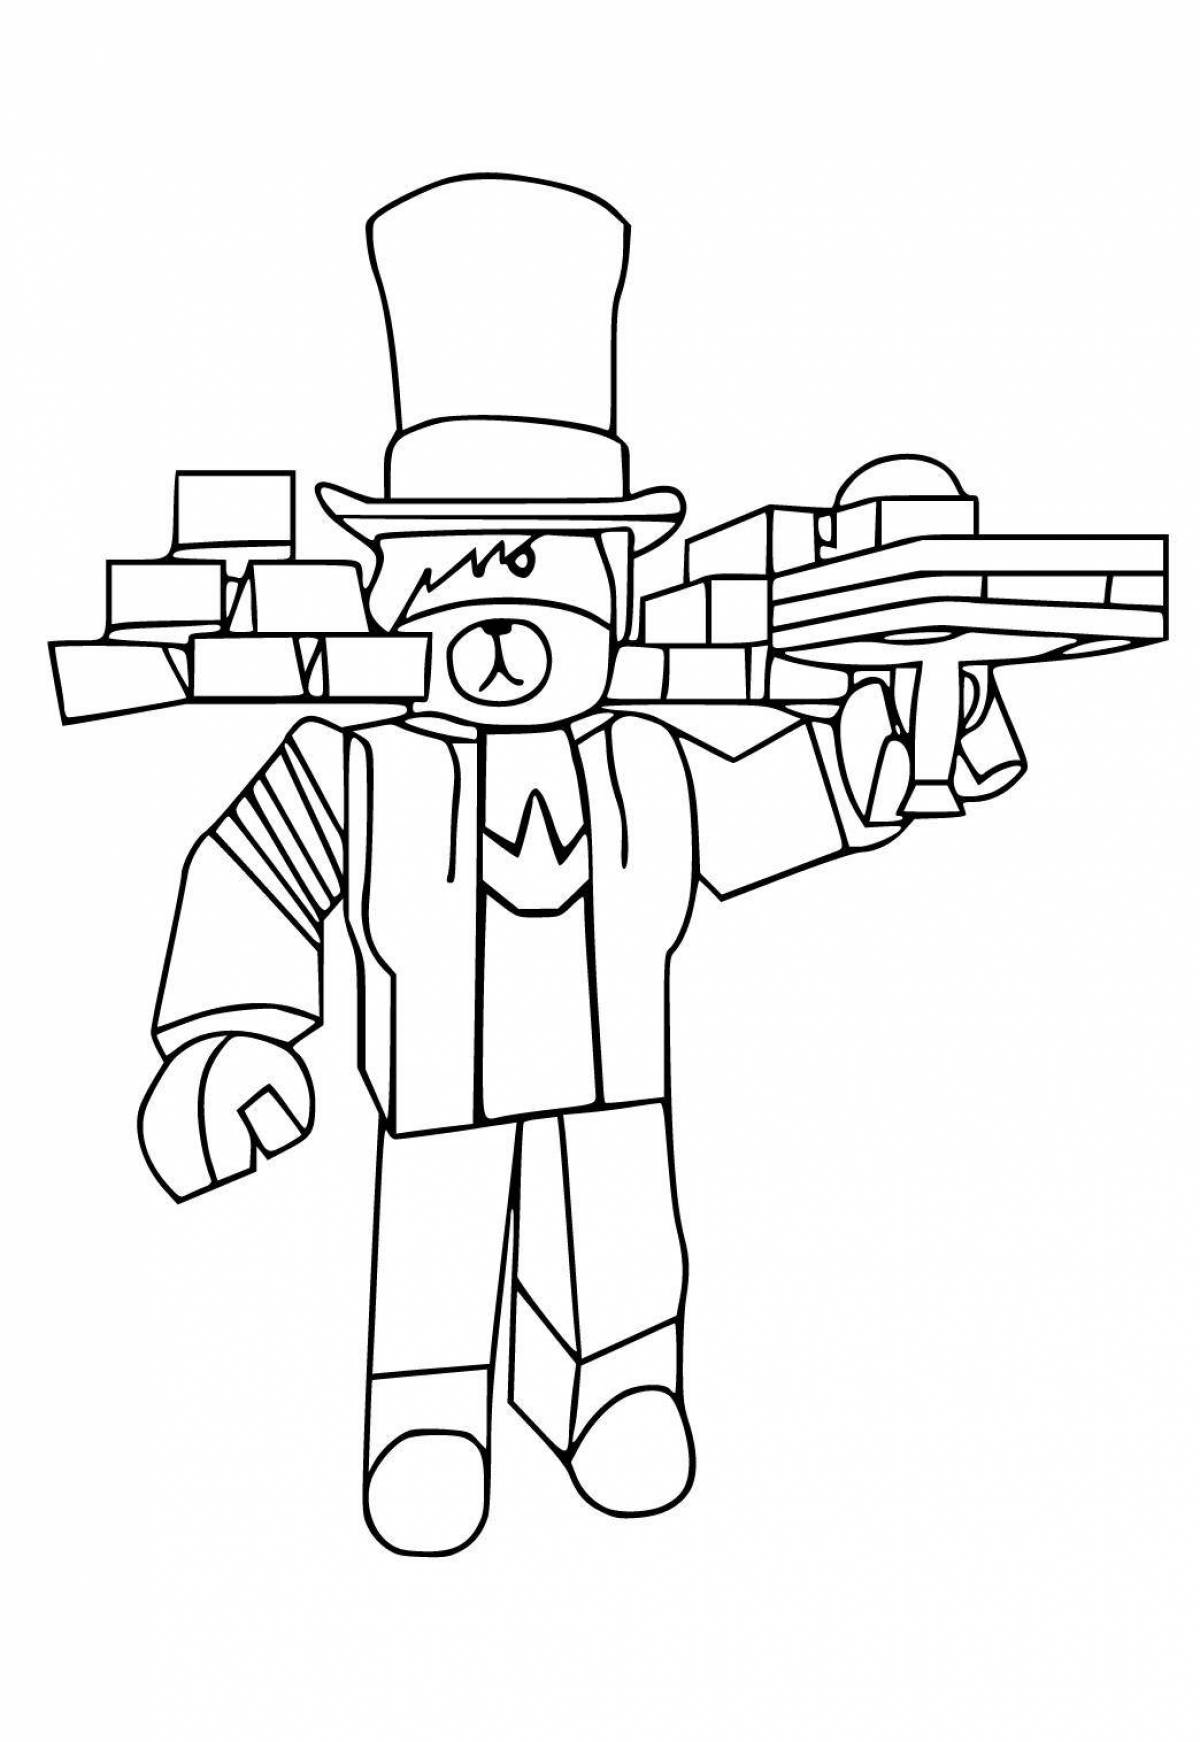 Roblox wonderful coloring book for 10 year old boys